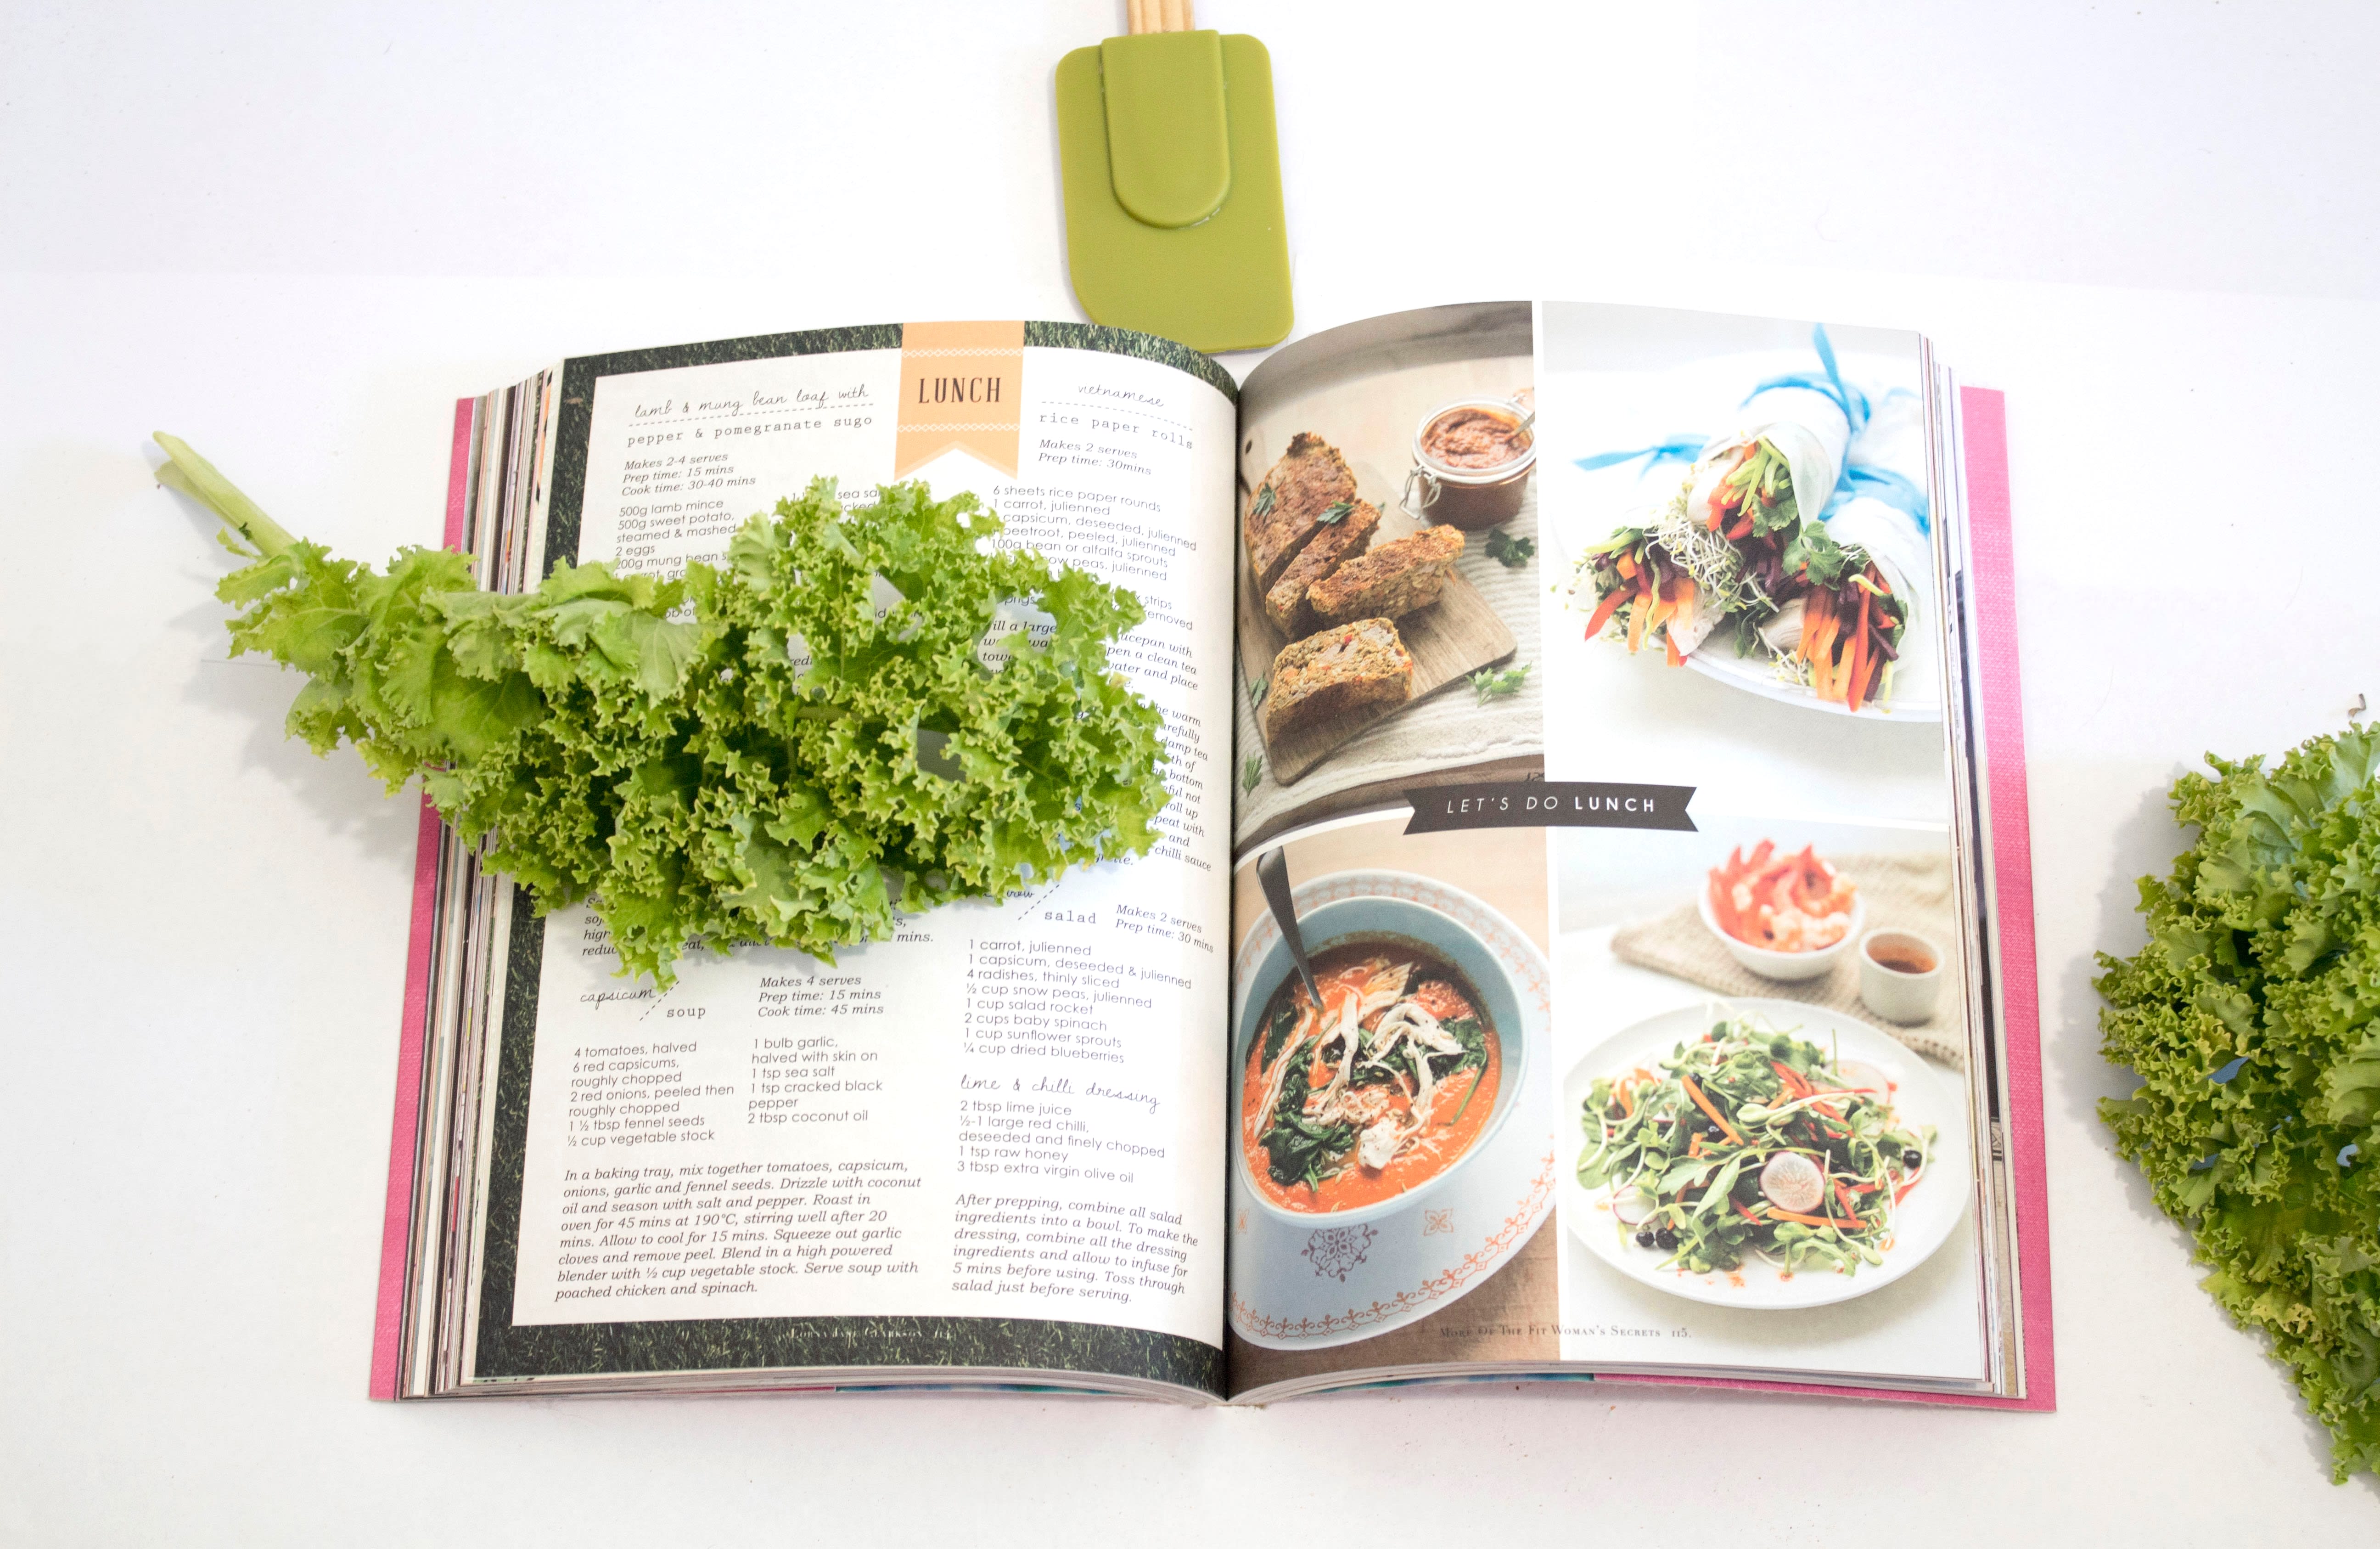 Design And Format Your Cookbook Meal Plan Or Recipe Book By Toeboygodians1